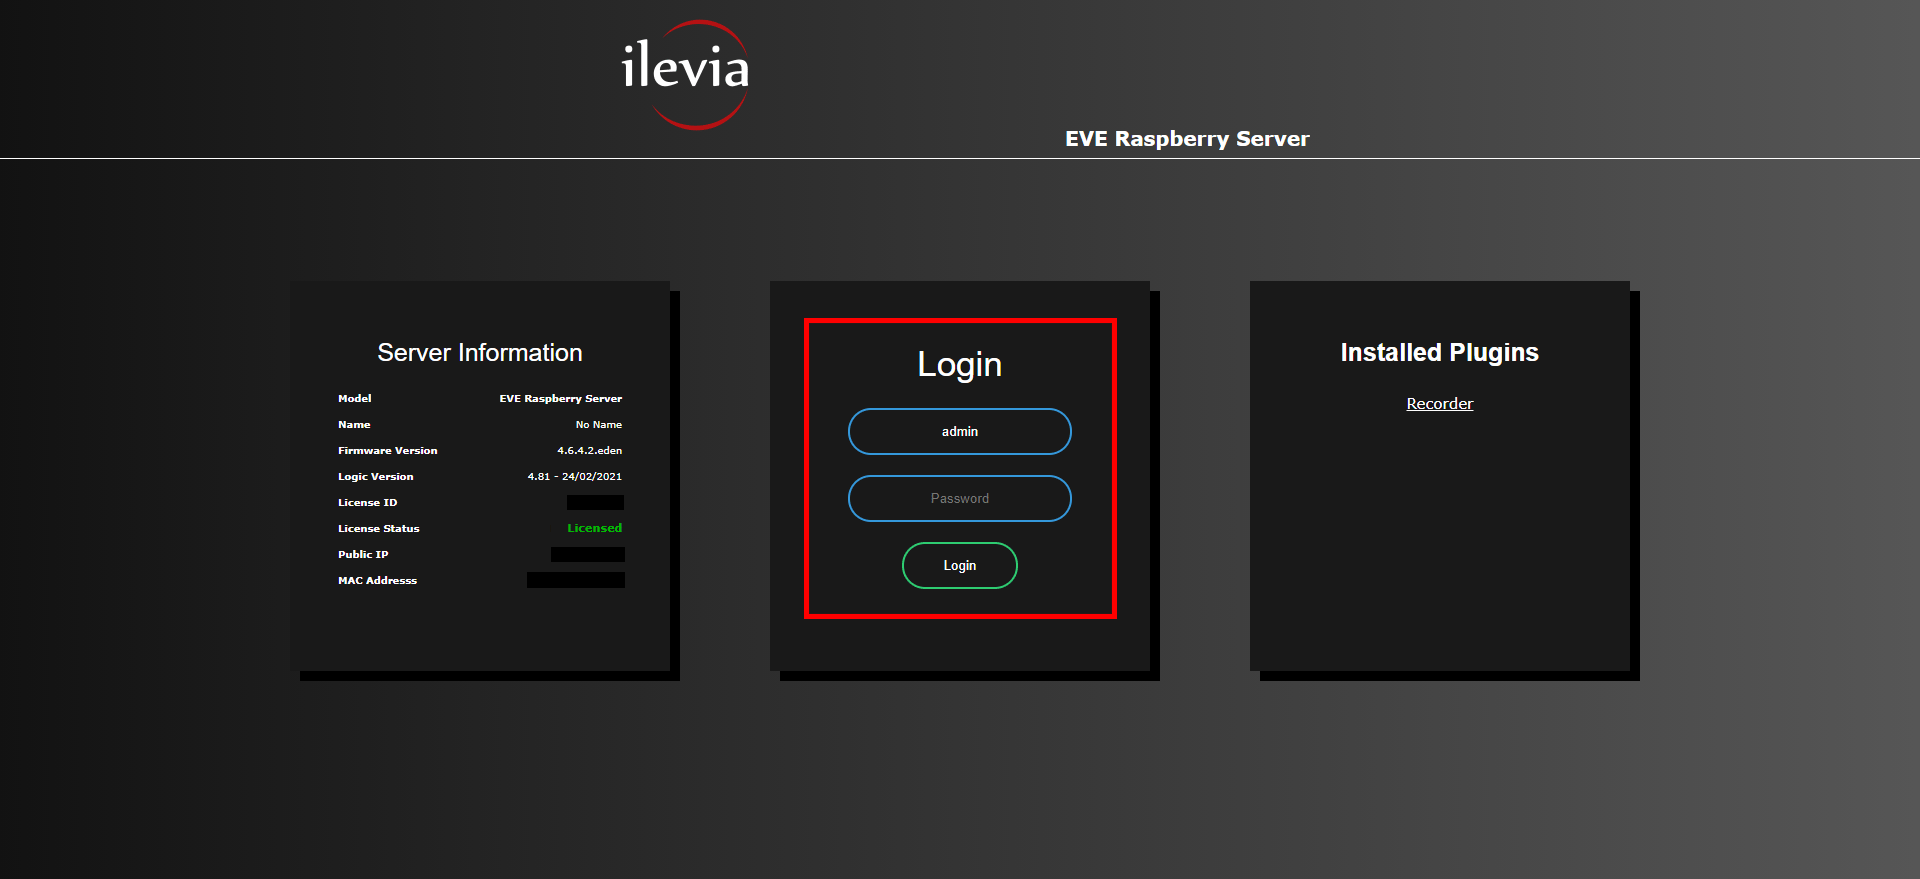 How to login inside the Web configuration pannel of the Home automation Raspberry server EVE